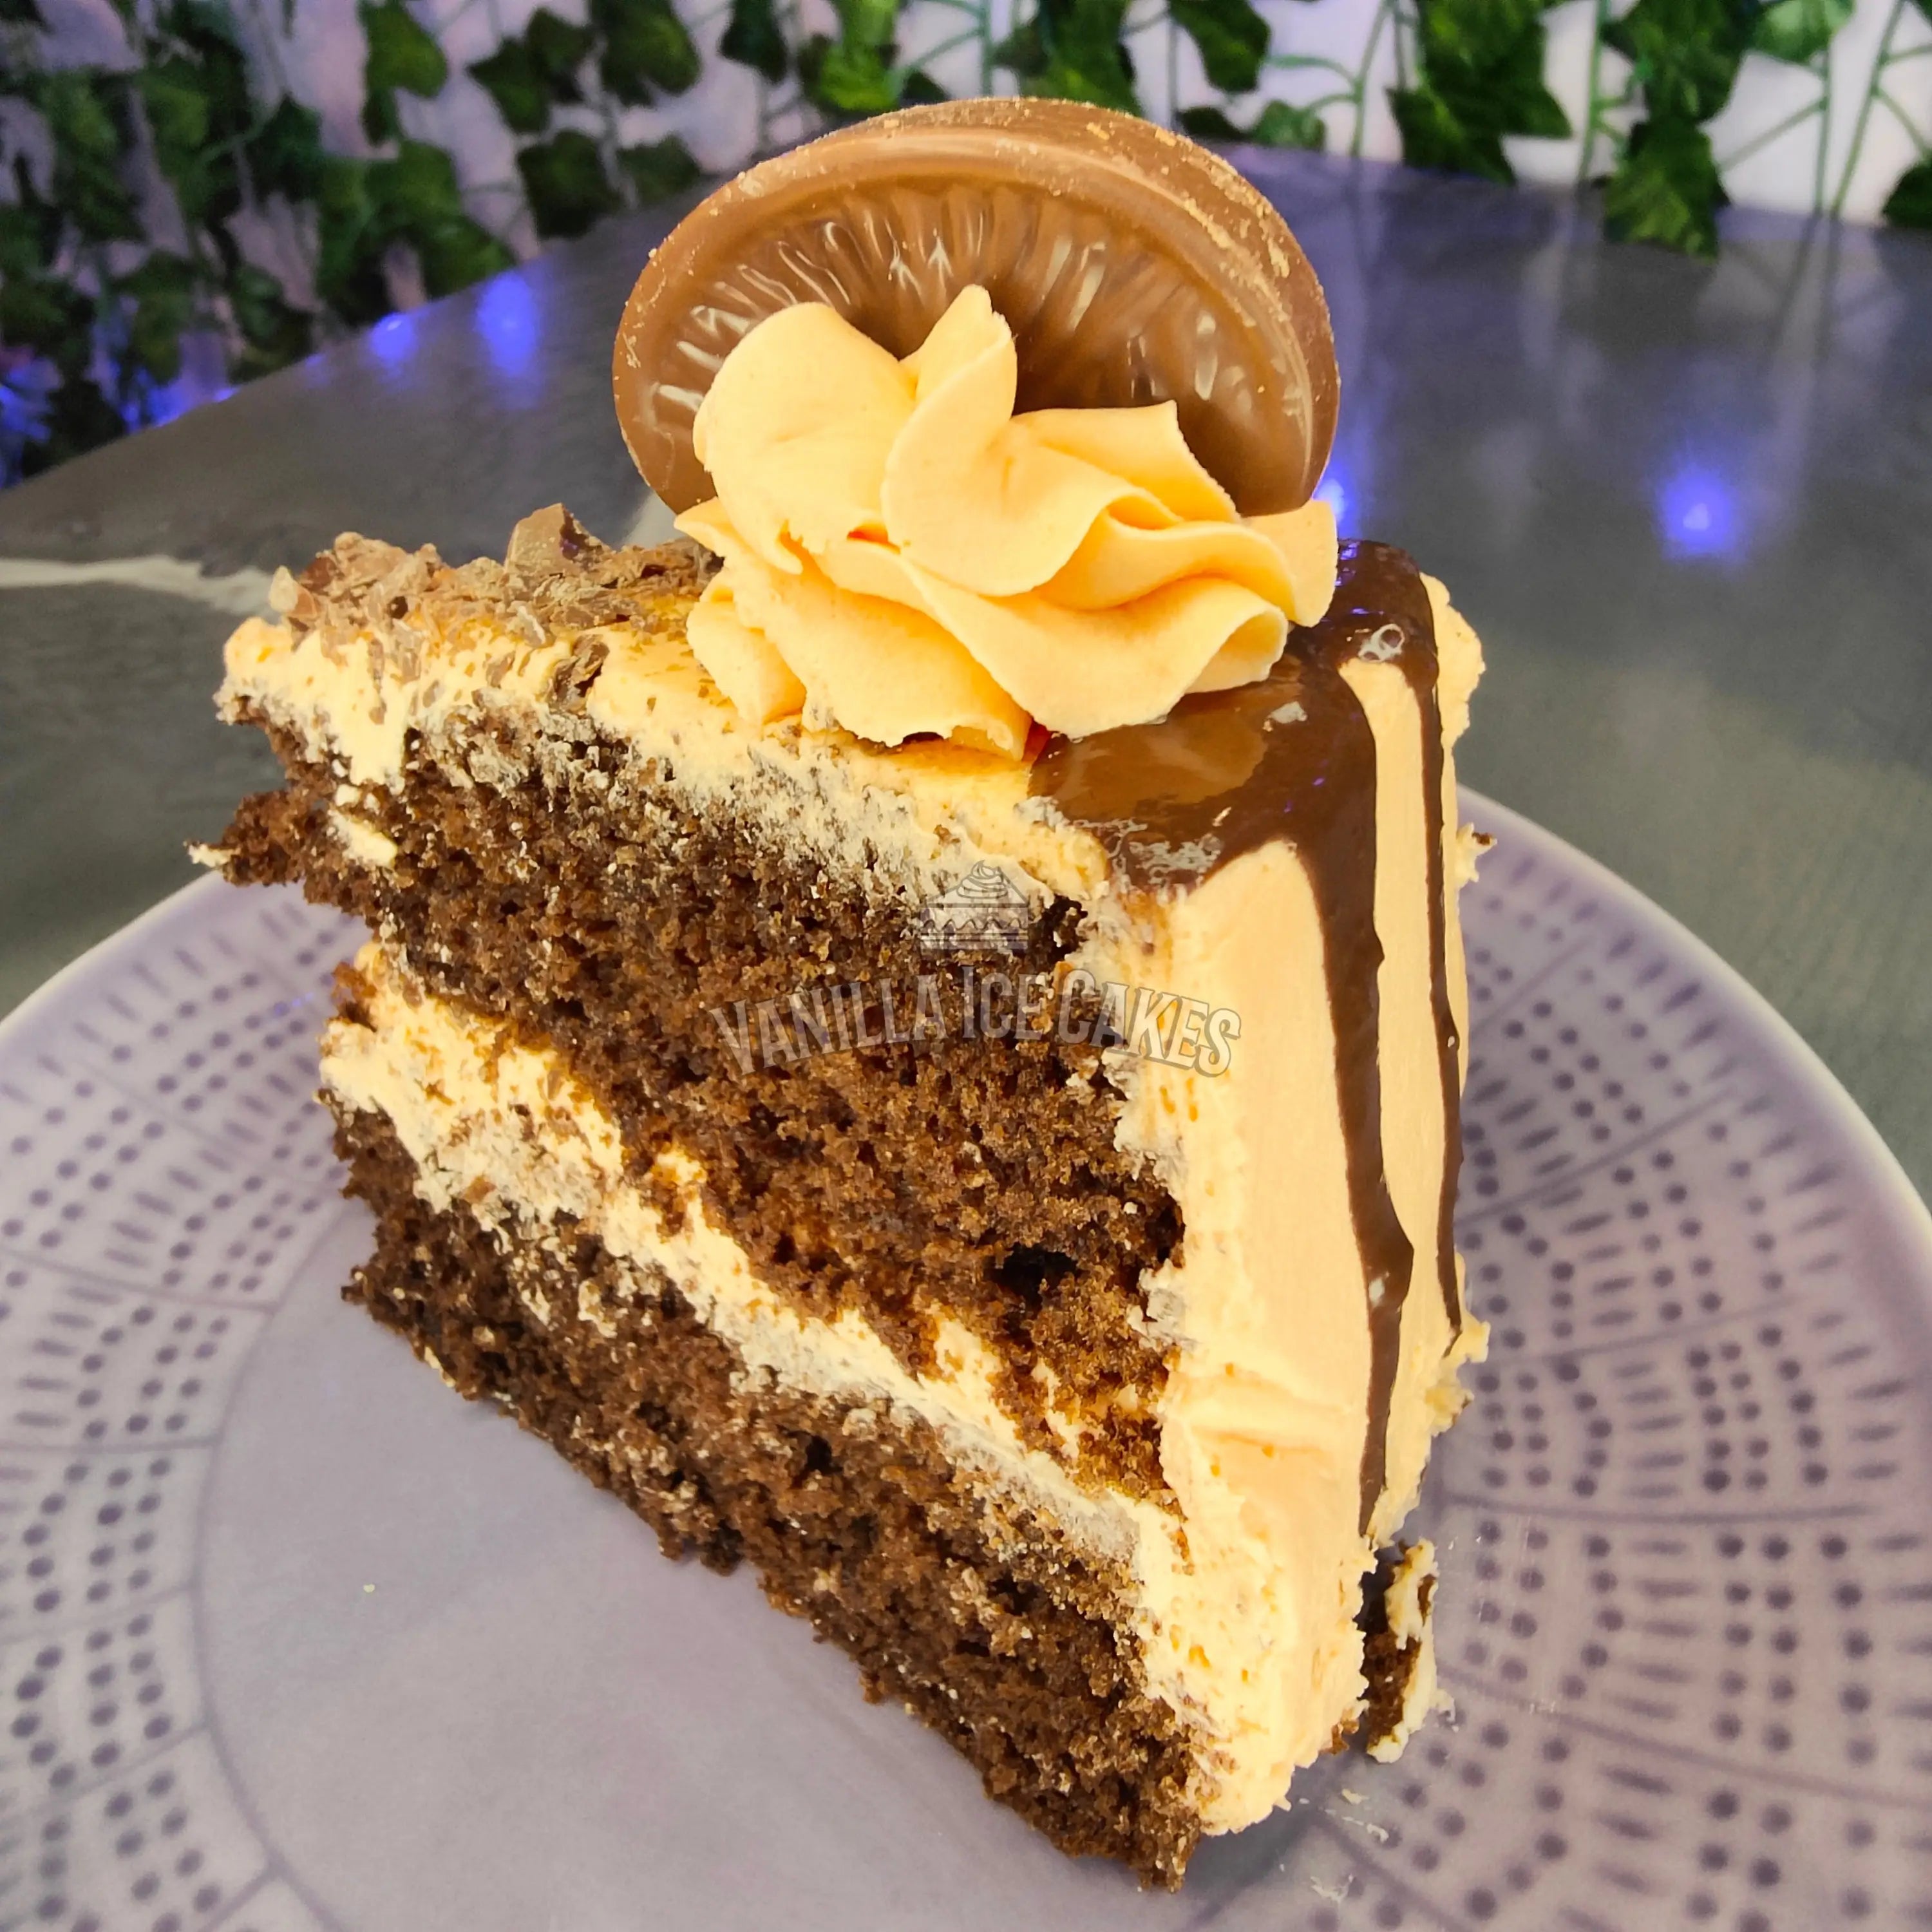 Lambert Rustic Foods - Coffee and Walnuts celebration Cake 🎂 Do you have  special celebration coming up soon or maybe you would like to surprise  somebody with a delicious celebration cake? Contact